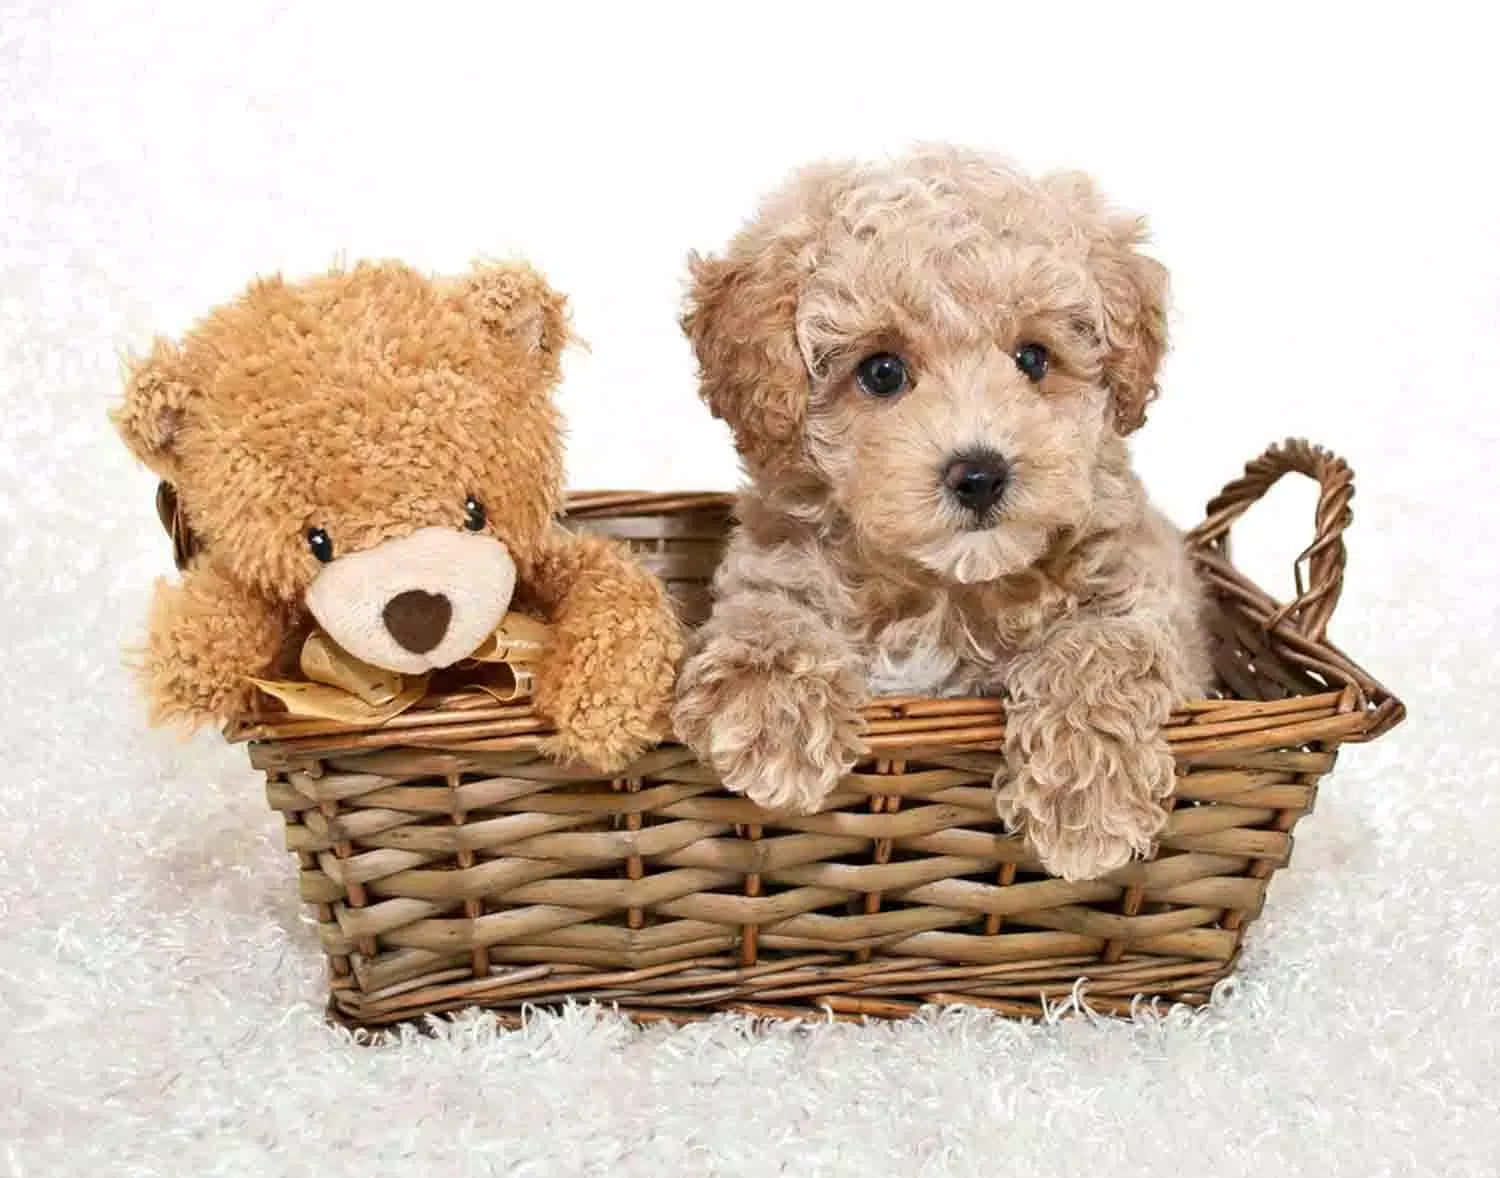 A Teddy Bear And A Puppy In A Basket Wallpaper